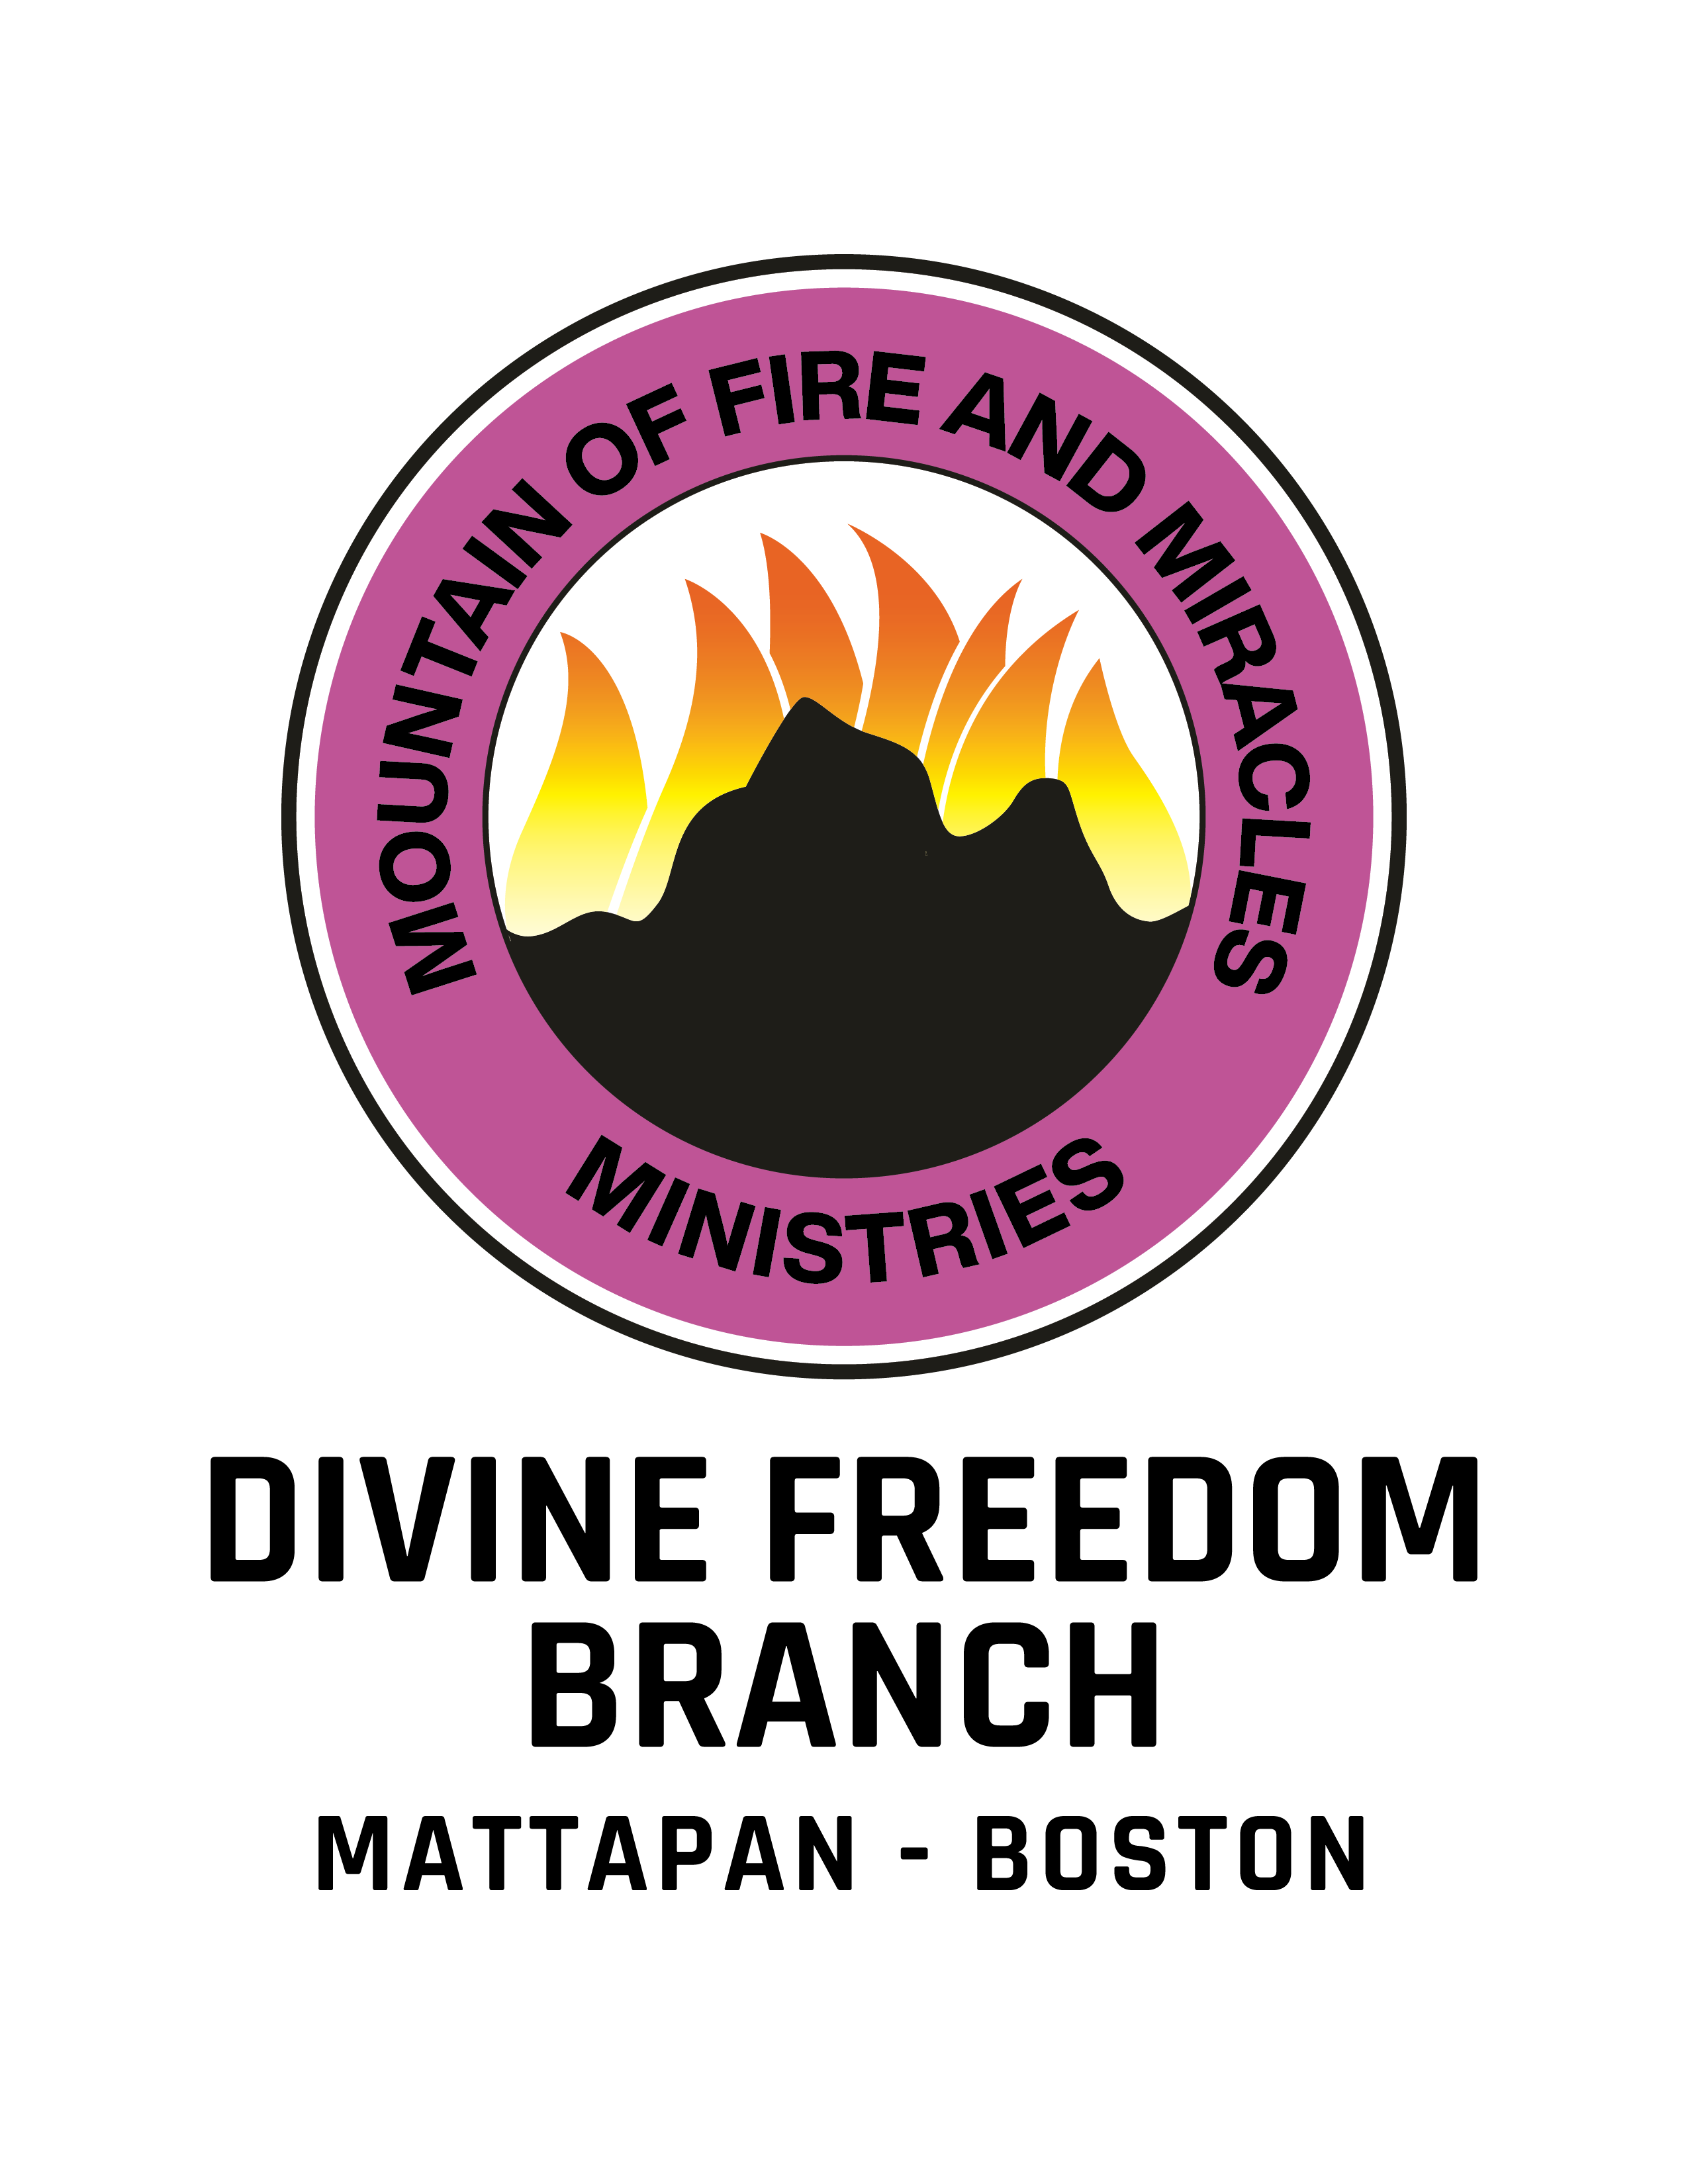  Mountain of Fire and Miracles Ministries (MFM) Divine Freedom Branch, North Houston, Texas